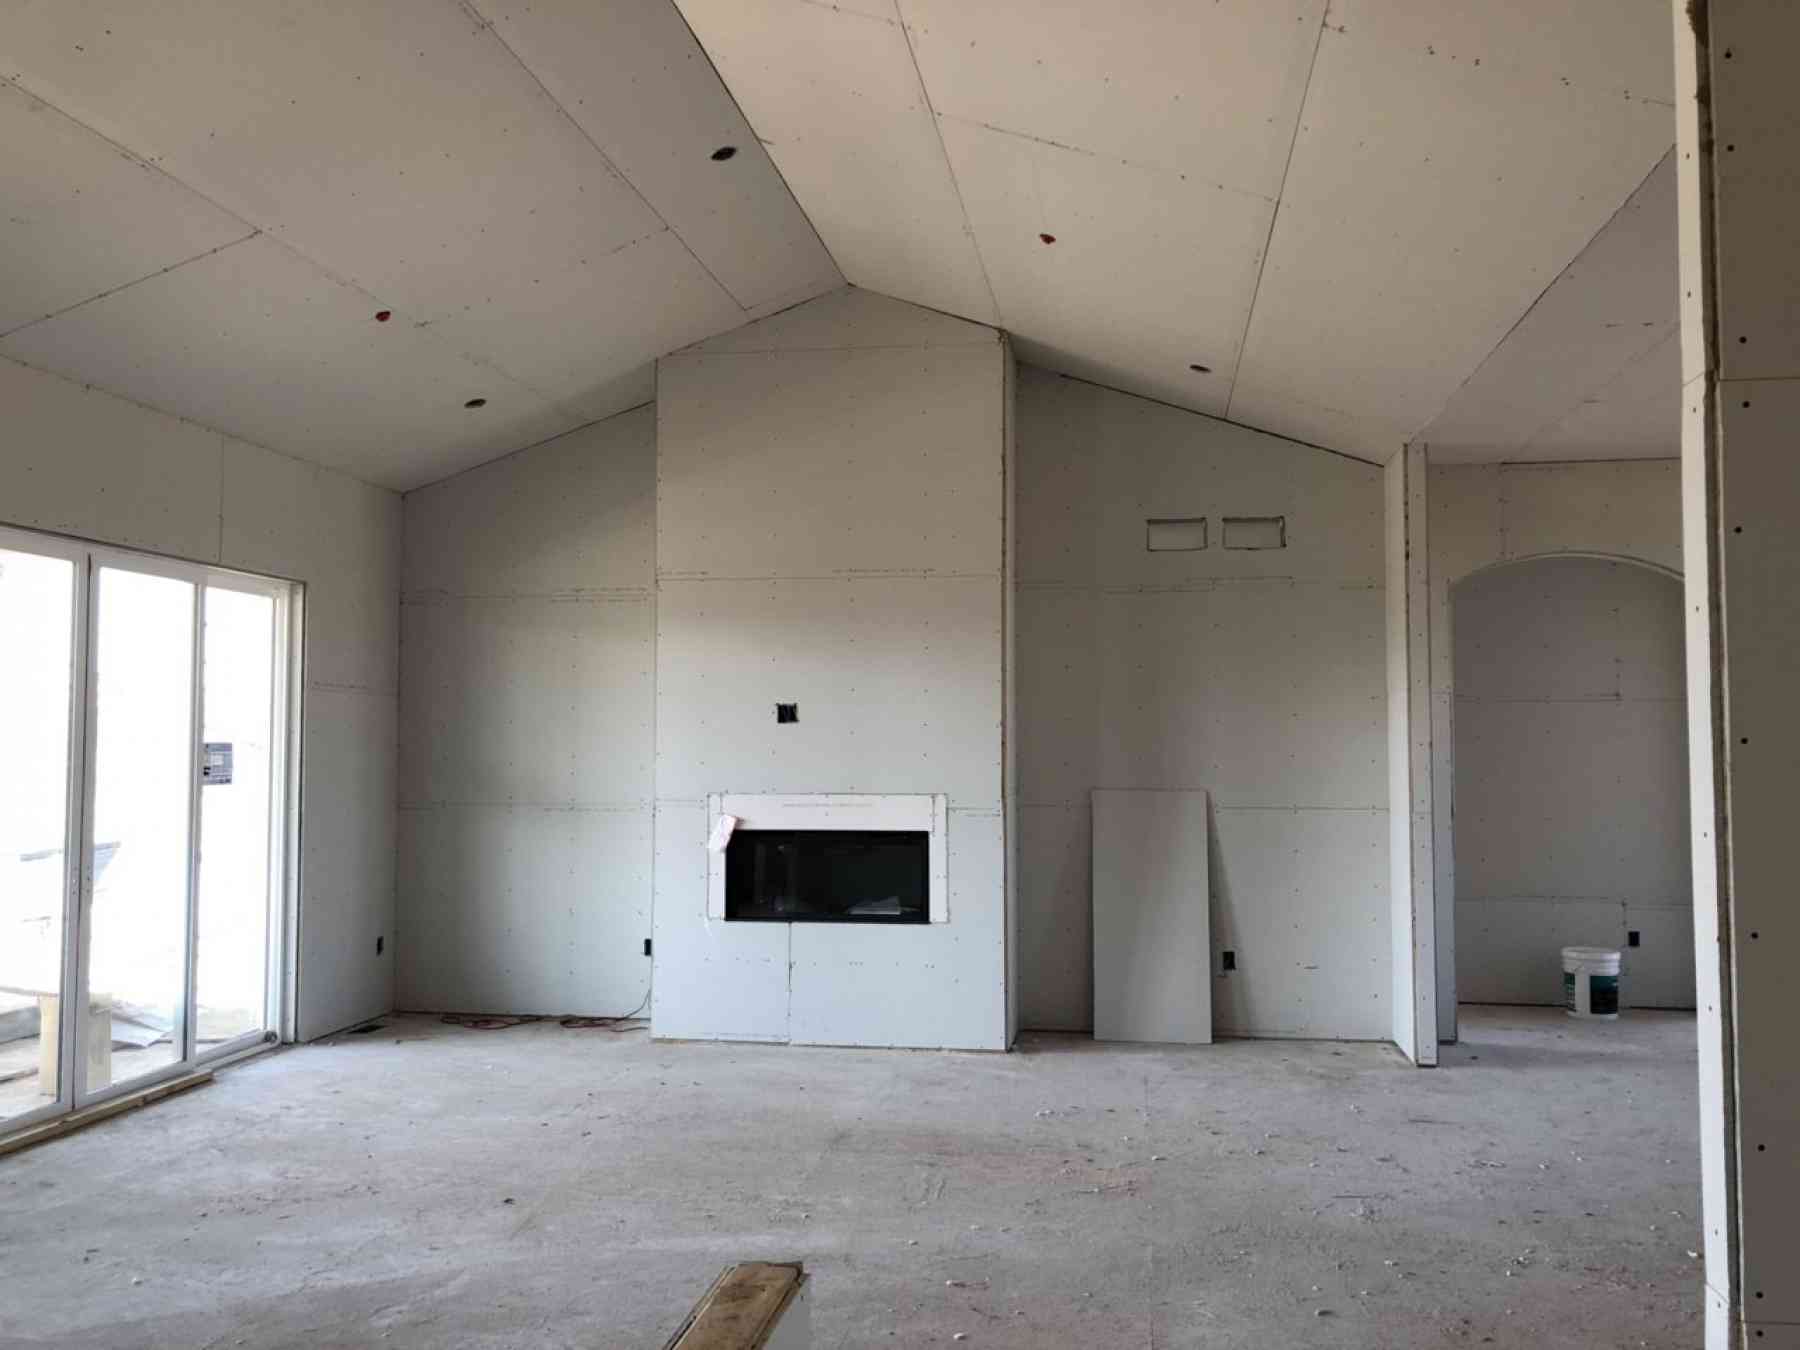 Living Room View During Drywall Installation